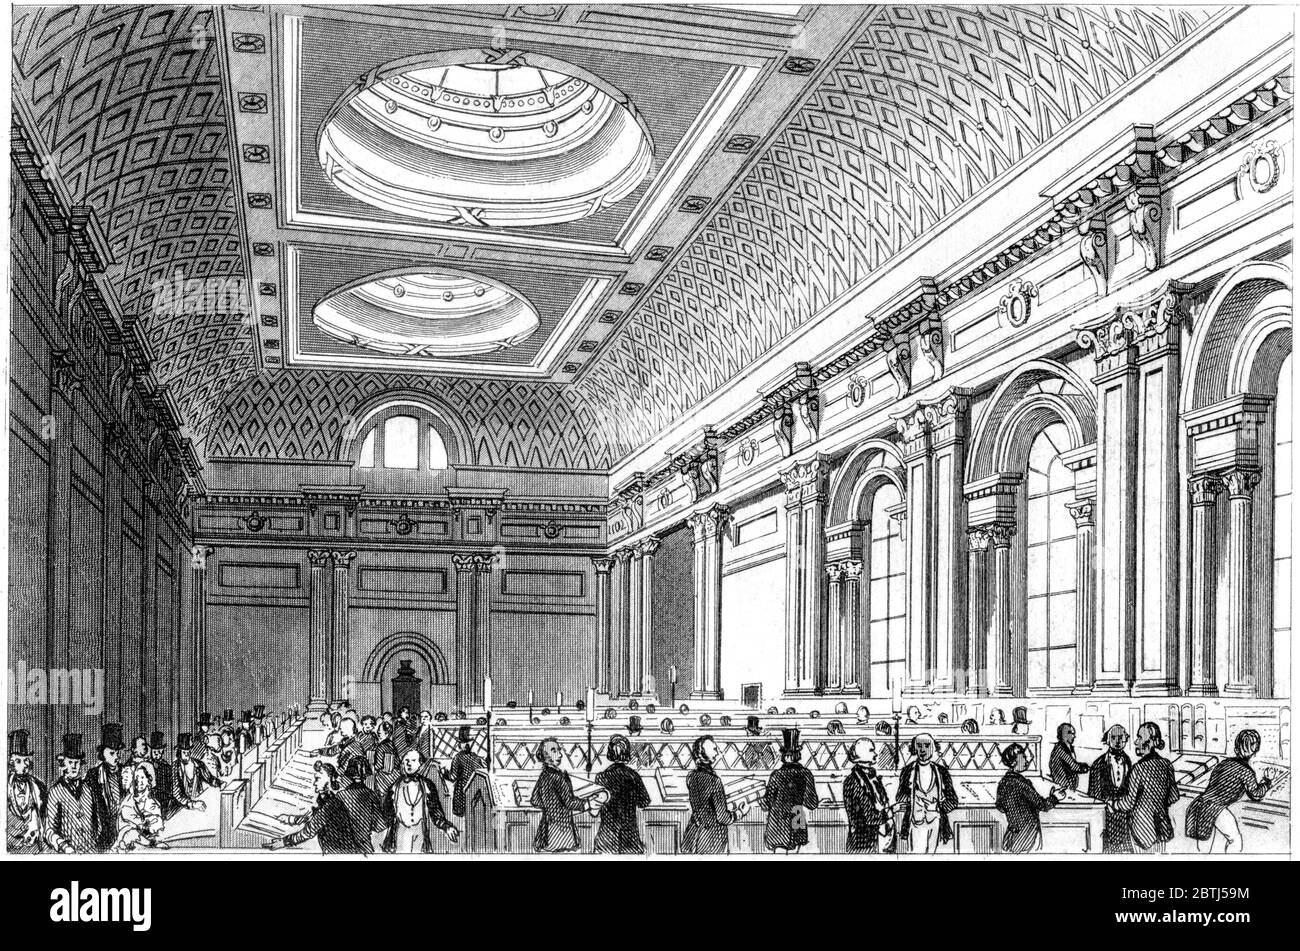 An engraving of The Private Banking Department Bank of England scanned at high resolution from a book printed in 1851. Believed copyright free. Stock Photo